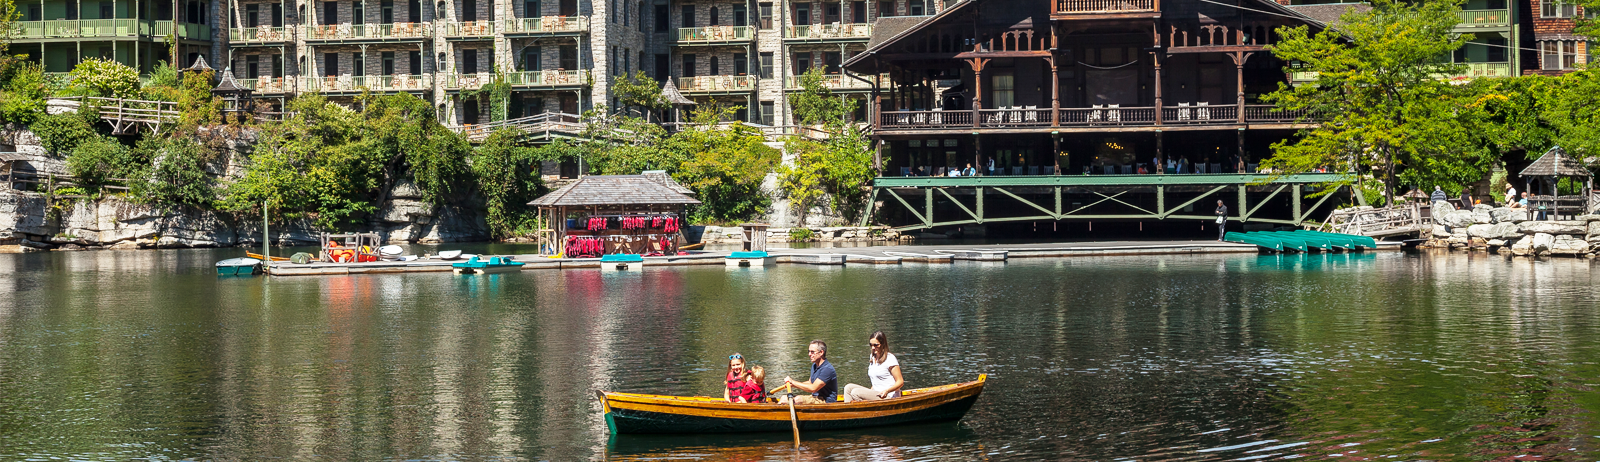 Boating for the Family at Mohonk